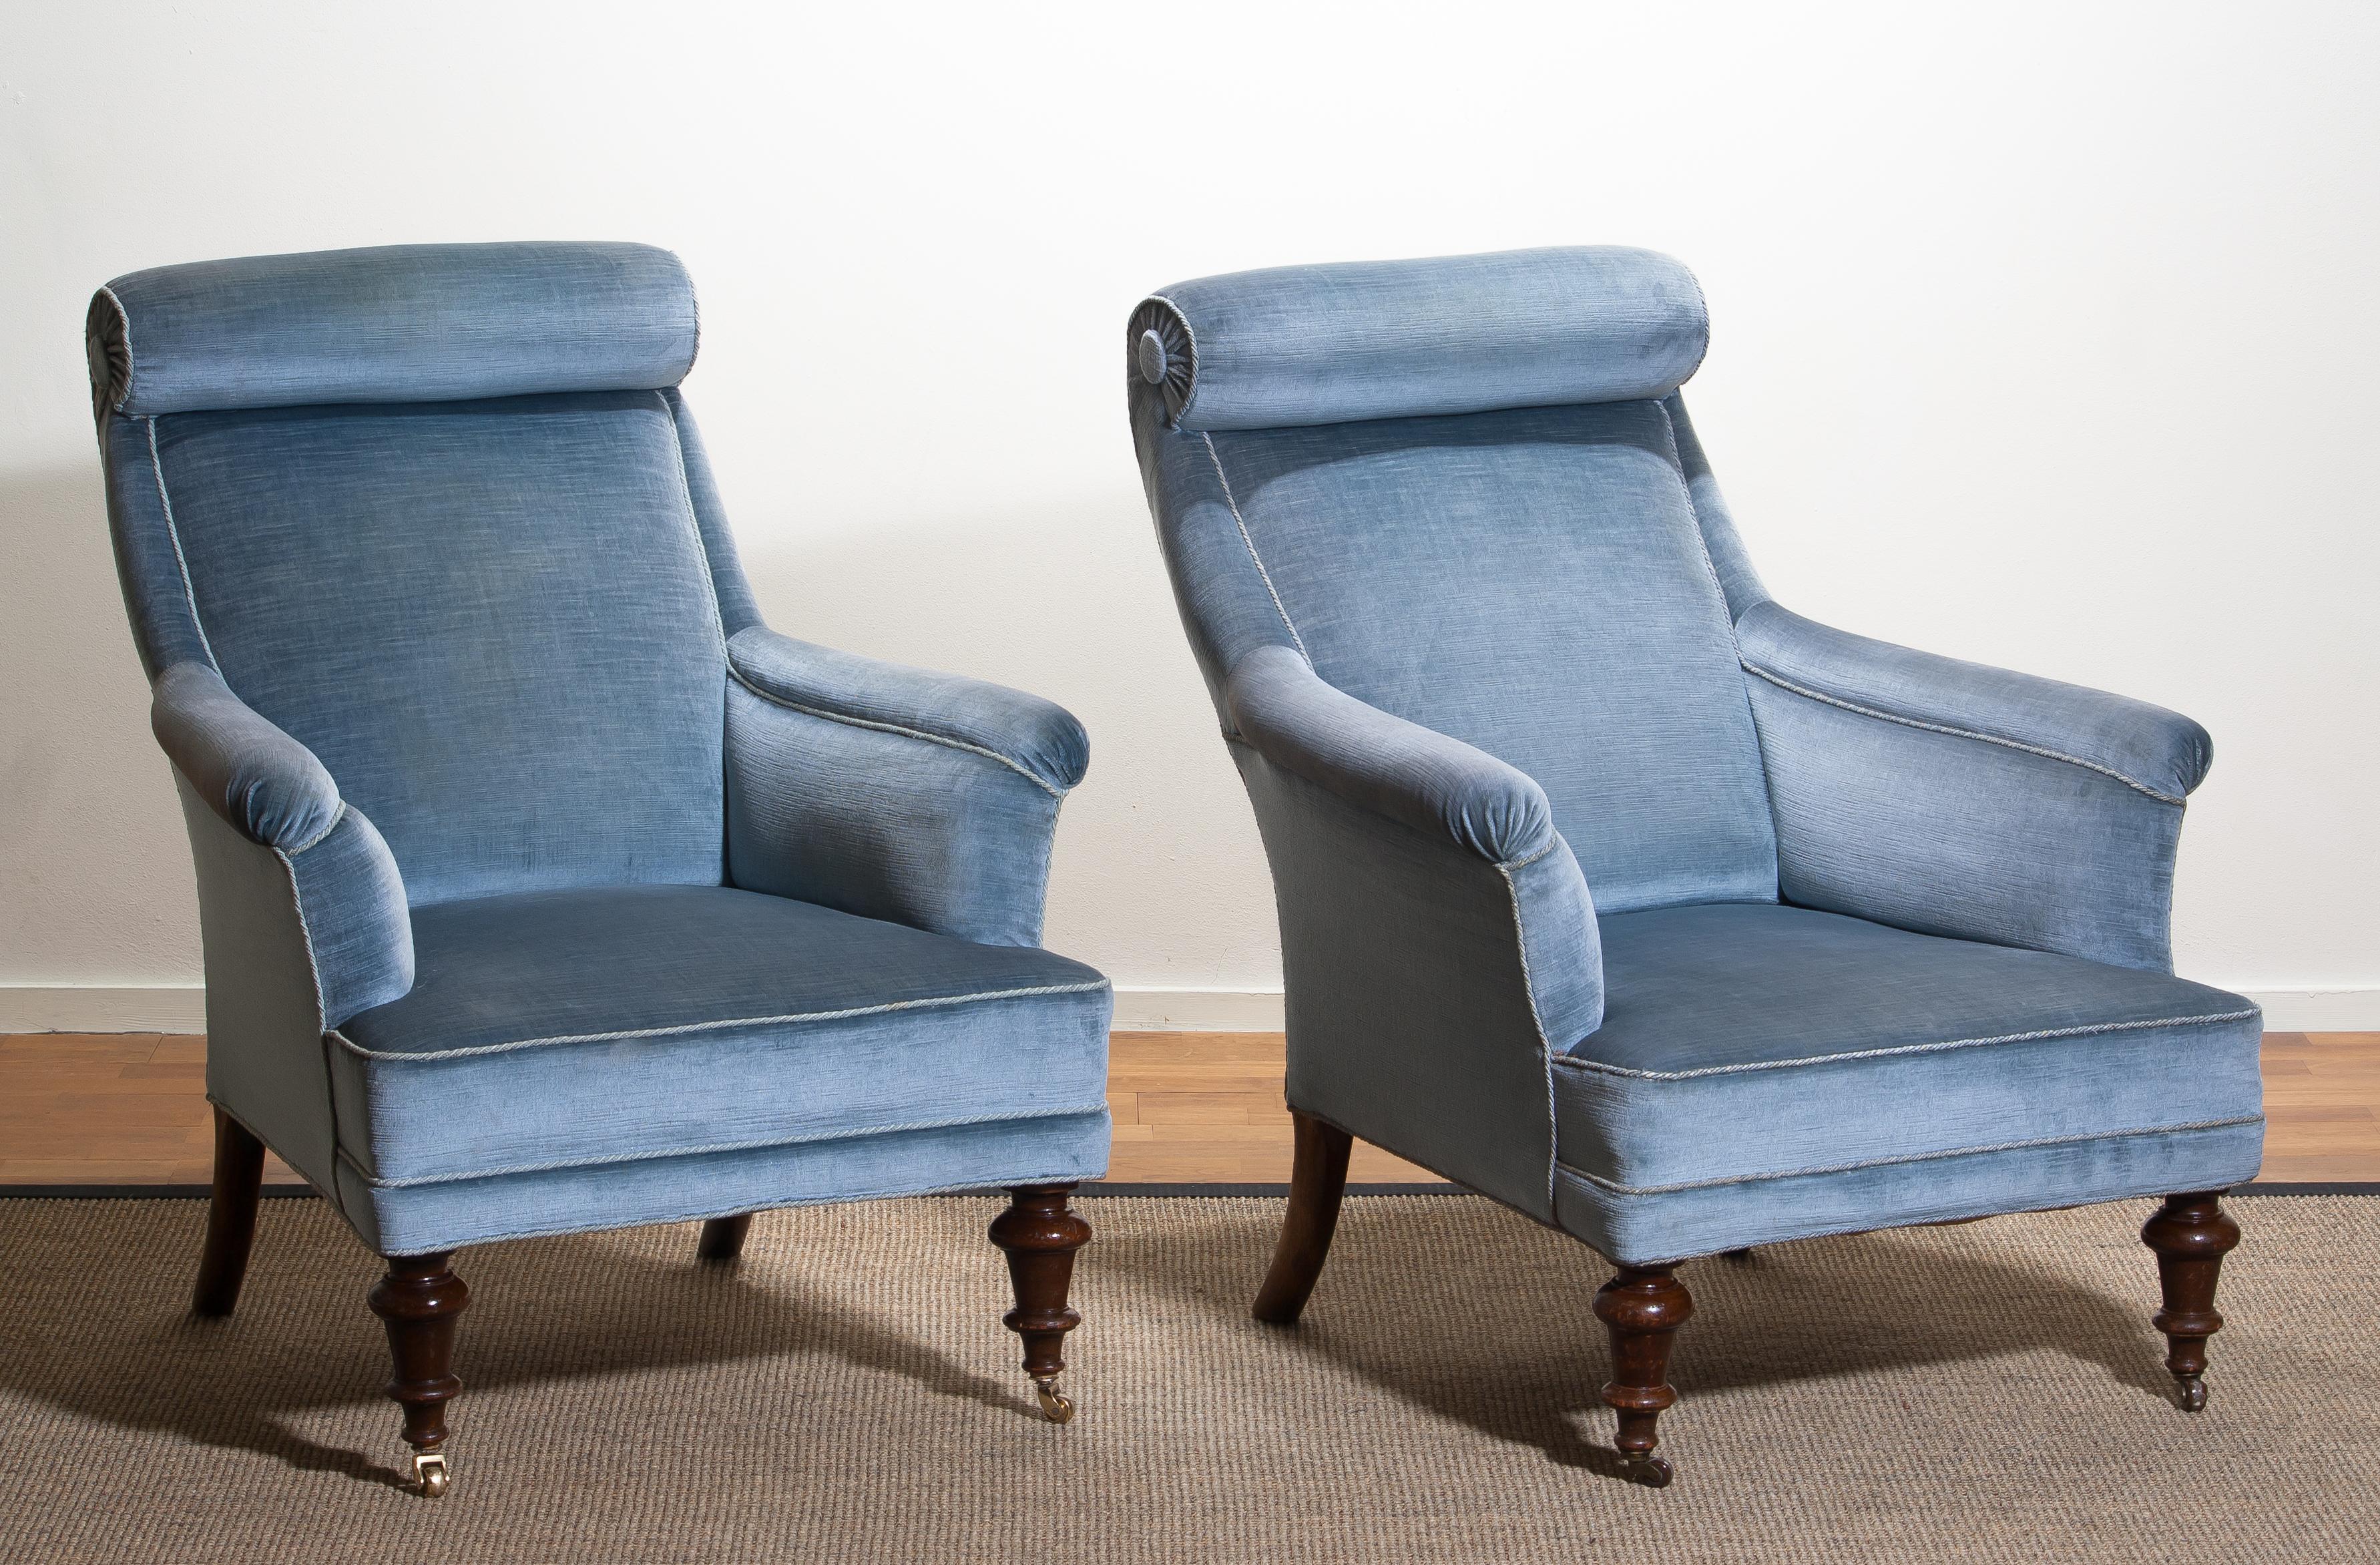 Rare and extremely comfortable / beautiful set of two bergère / lounge chairs in Dorothy Draper style from the turn to the 20th century.
Both chairs are upholstered in ice blue velvet and in good condition.

One chair has new wheels in brass and